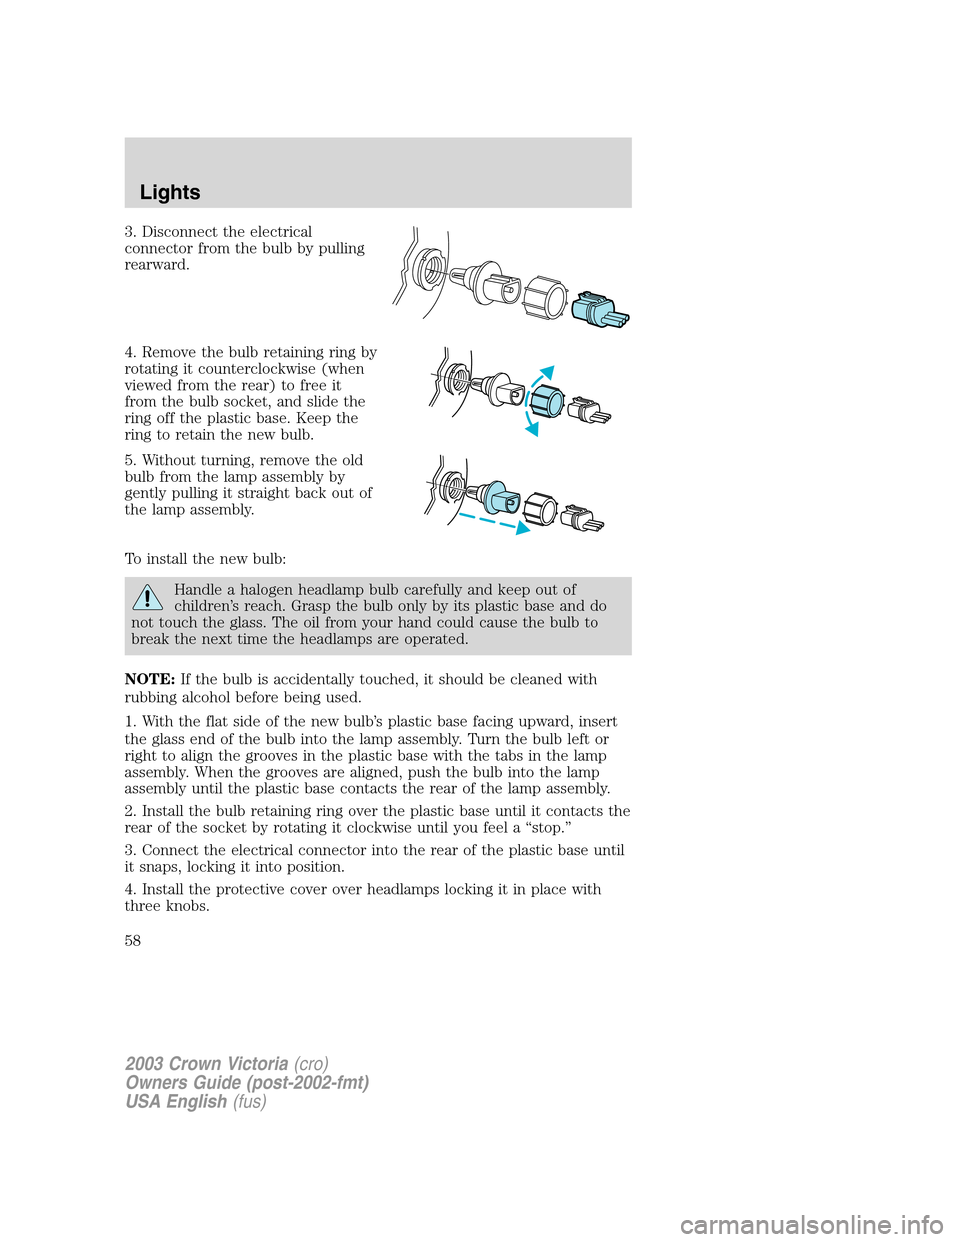 FORD CROWN VICTORIA 2003 2.G Owners Manual 3. Disconnect the electrical
connector from the bulb by pulling
rearward.
4. Remove the bulb retaining ring by
rotating it counterclockwise (when
viewed from the rear) to free it
from the bulb socket,